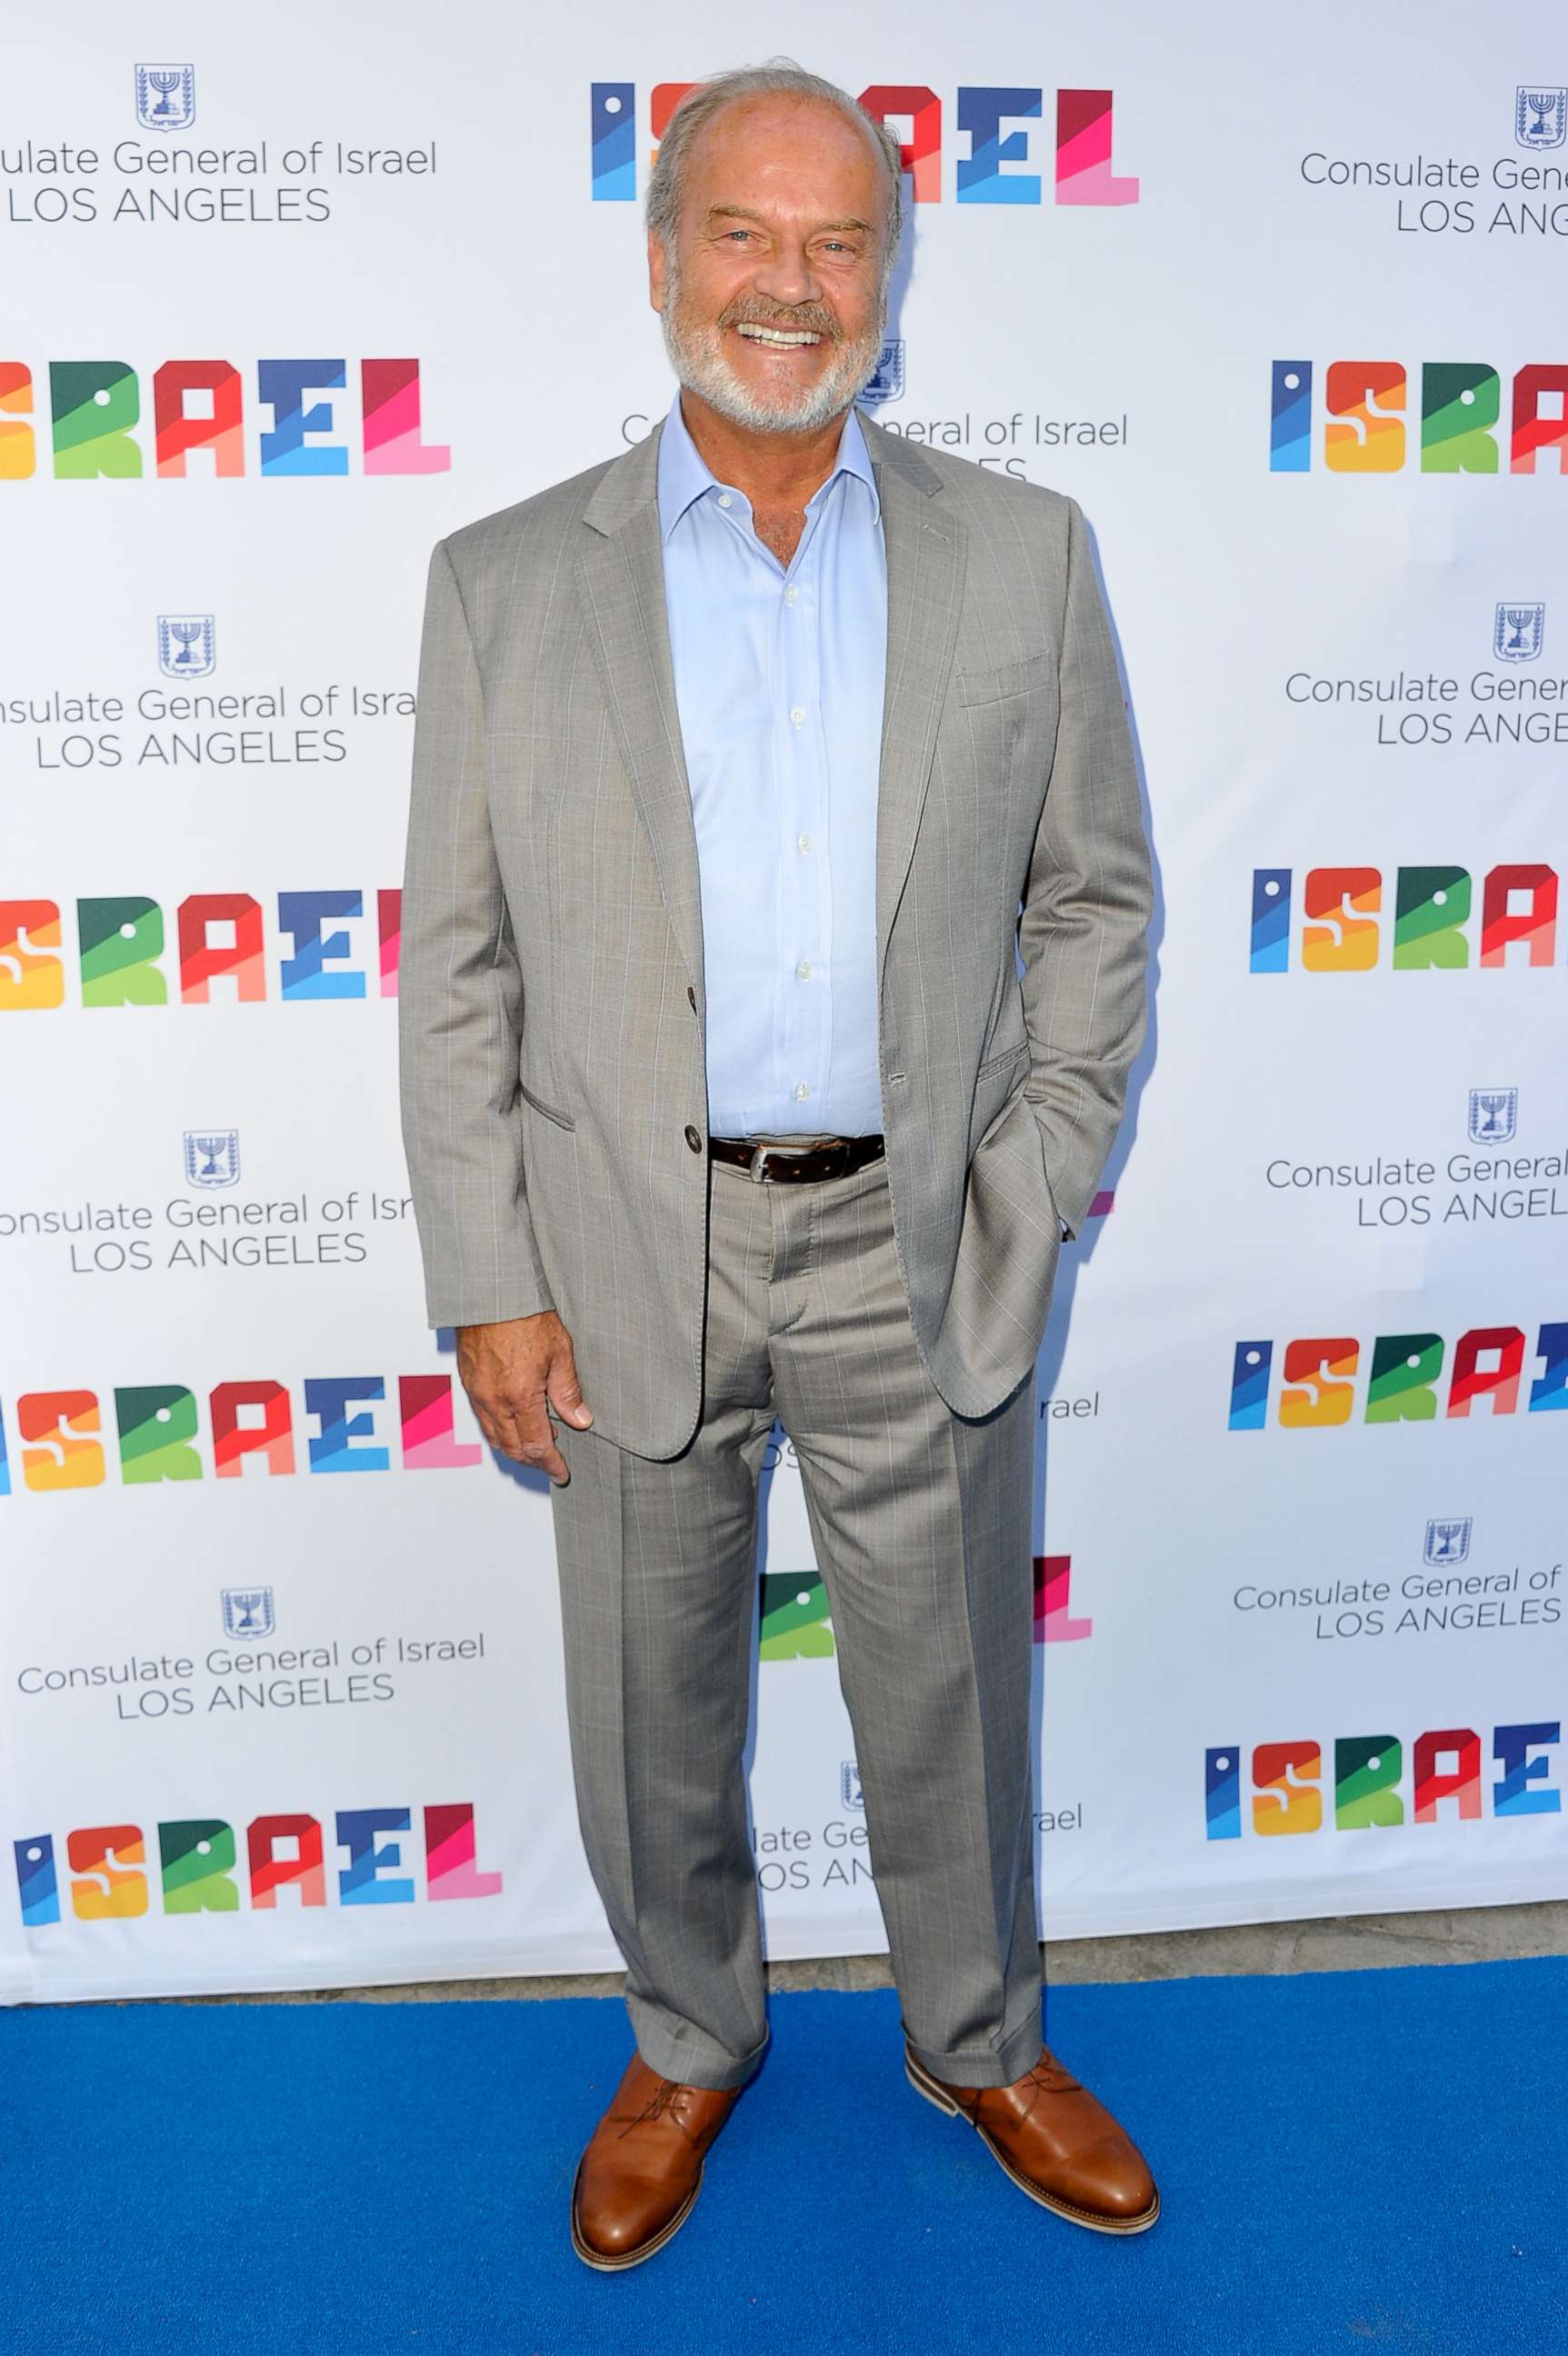 PHOTO: Kelsey Grammer attends a private celebration of The 70th Anniversary of Israel hosted by the Consul General of Israel, Los Angeles, Sam Grundwerg, June 10, 2018, in Los Angeles.